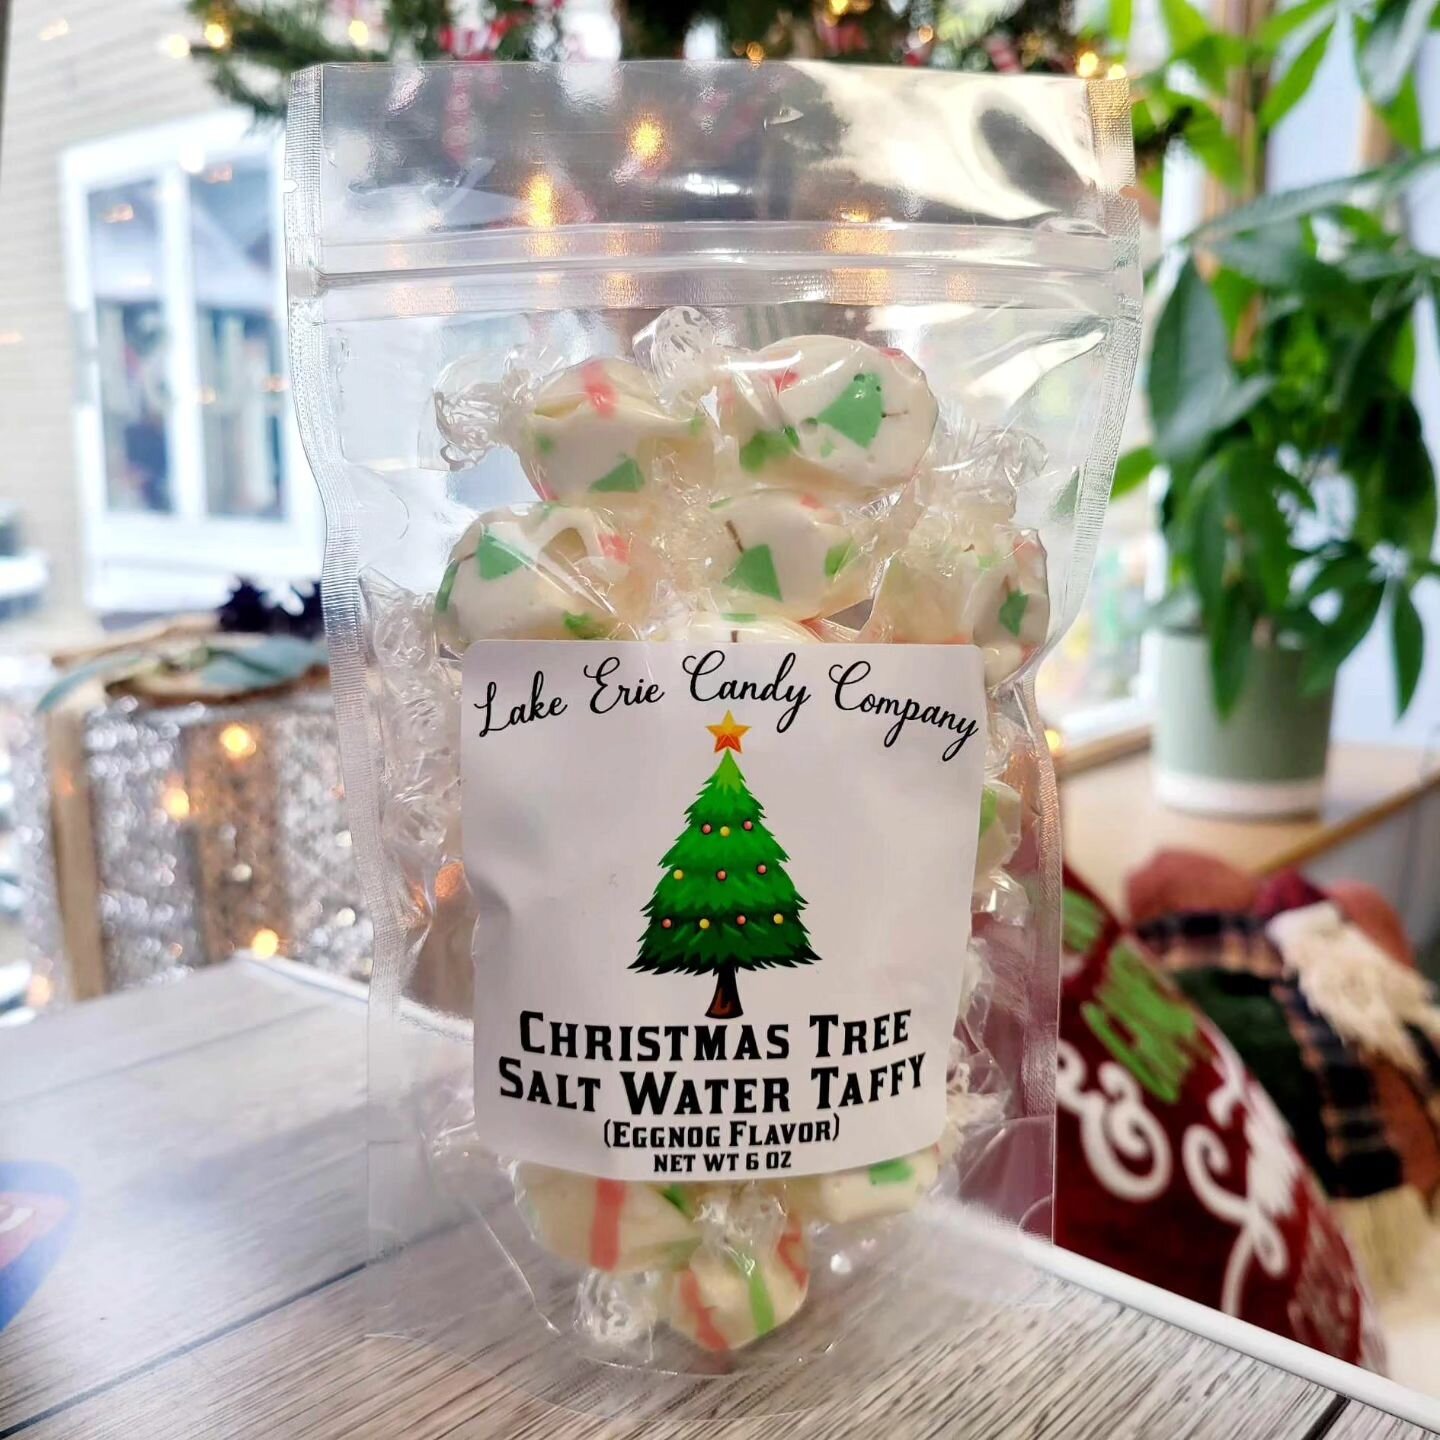 Here at Lake Erie Candy Company, we are in the Christmas spirit! Anyone who stops in and makes at least a $10 purchase will receive a FREE bag of Christmas Tree taffy!! (While supplies last!) 
Stop in and grab those last minute stocking stuffers or h